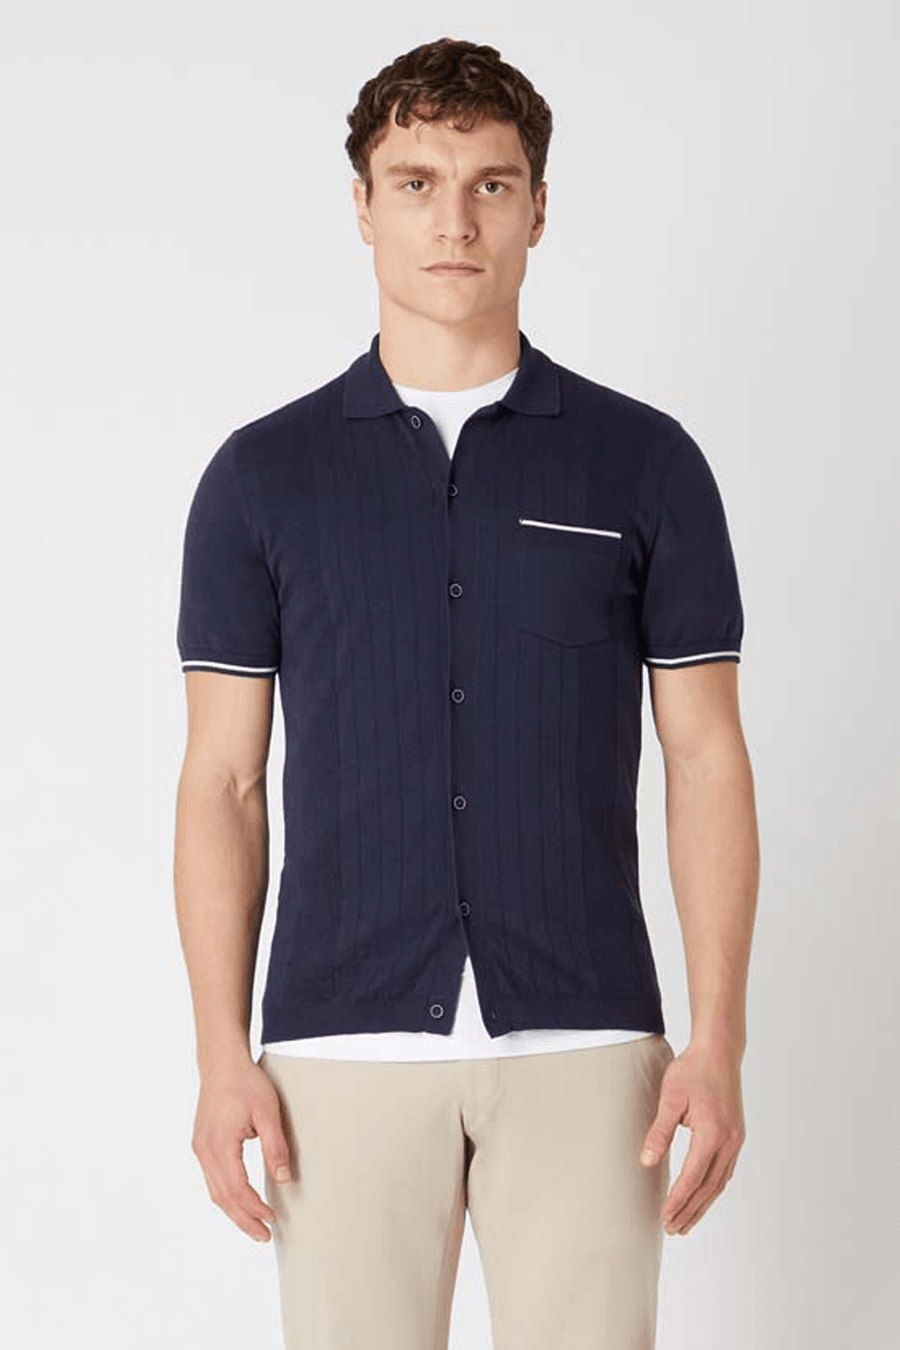 Buy the Remus Uomo S/S Button Through Polo in Navy at Intro. Spend £50 for free UK delivery. Official stockists. We ship worldwide.